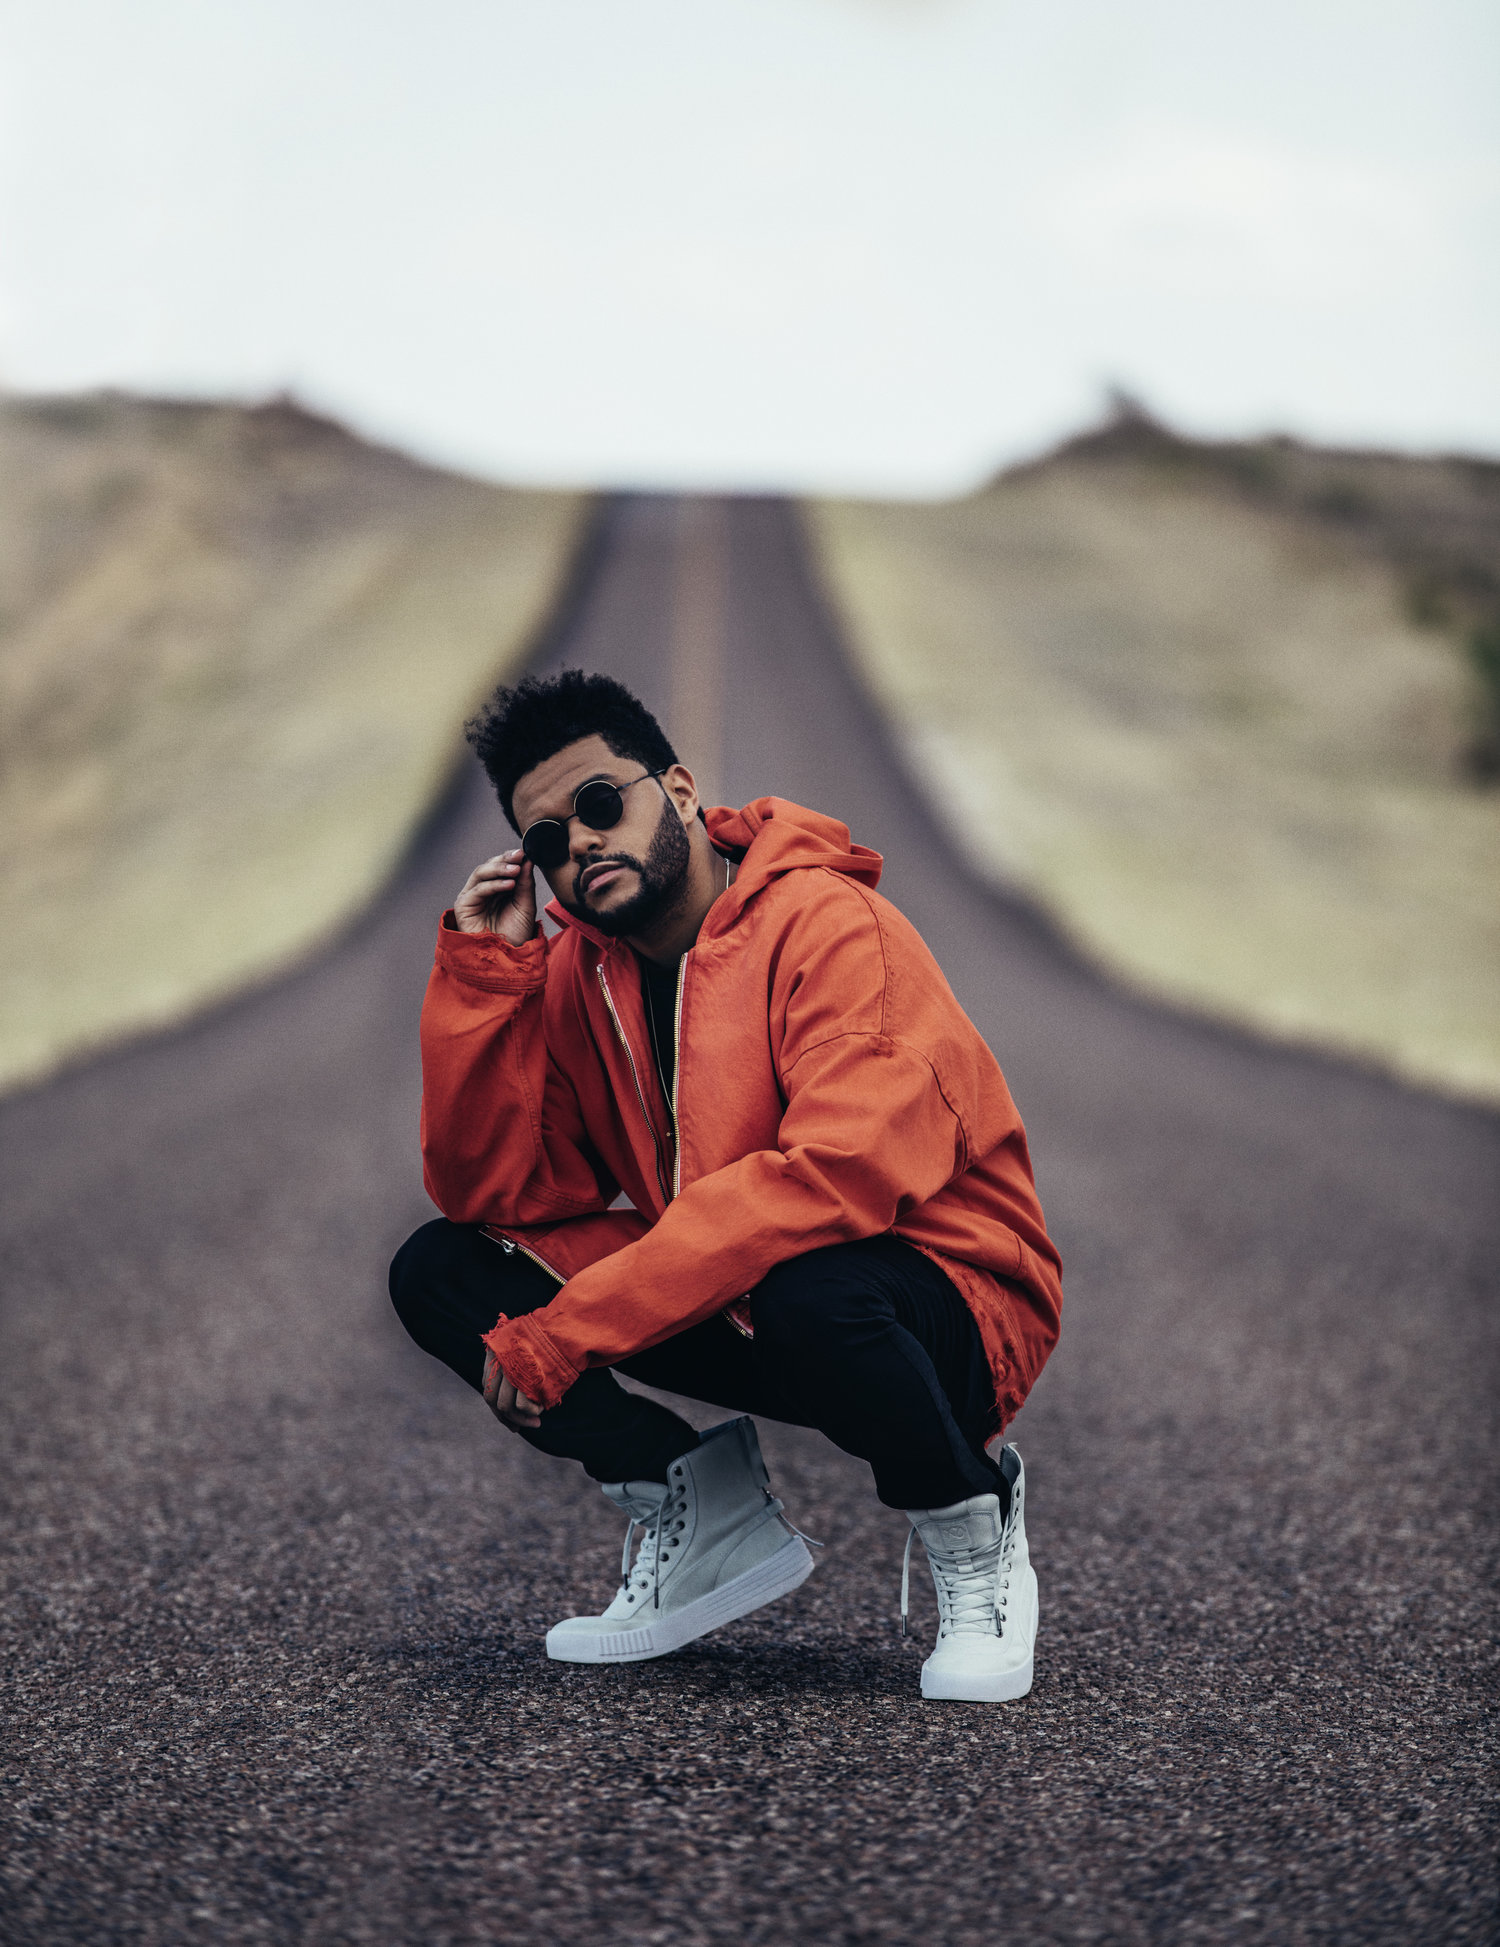 PUMA unveil collaboration with The Weeknd